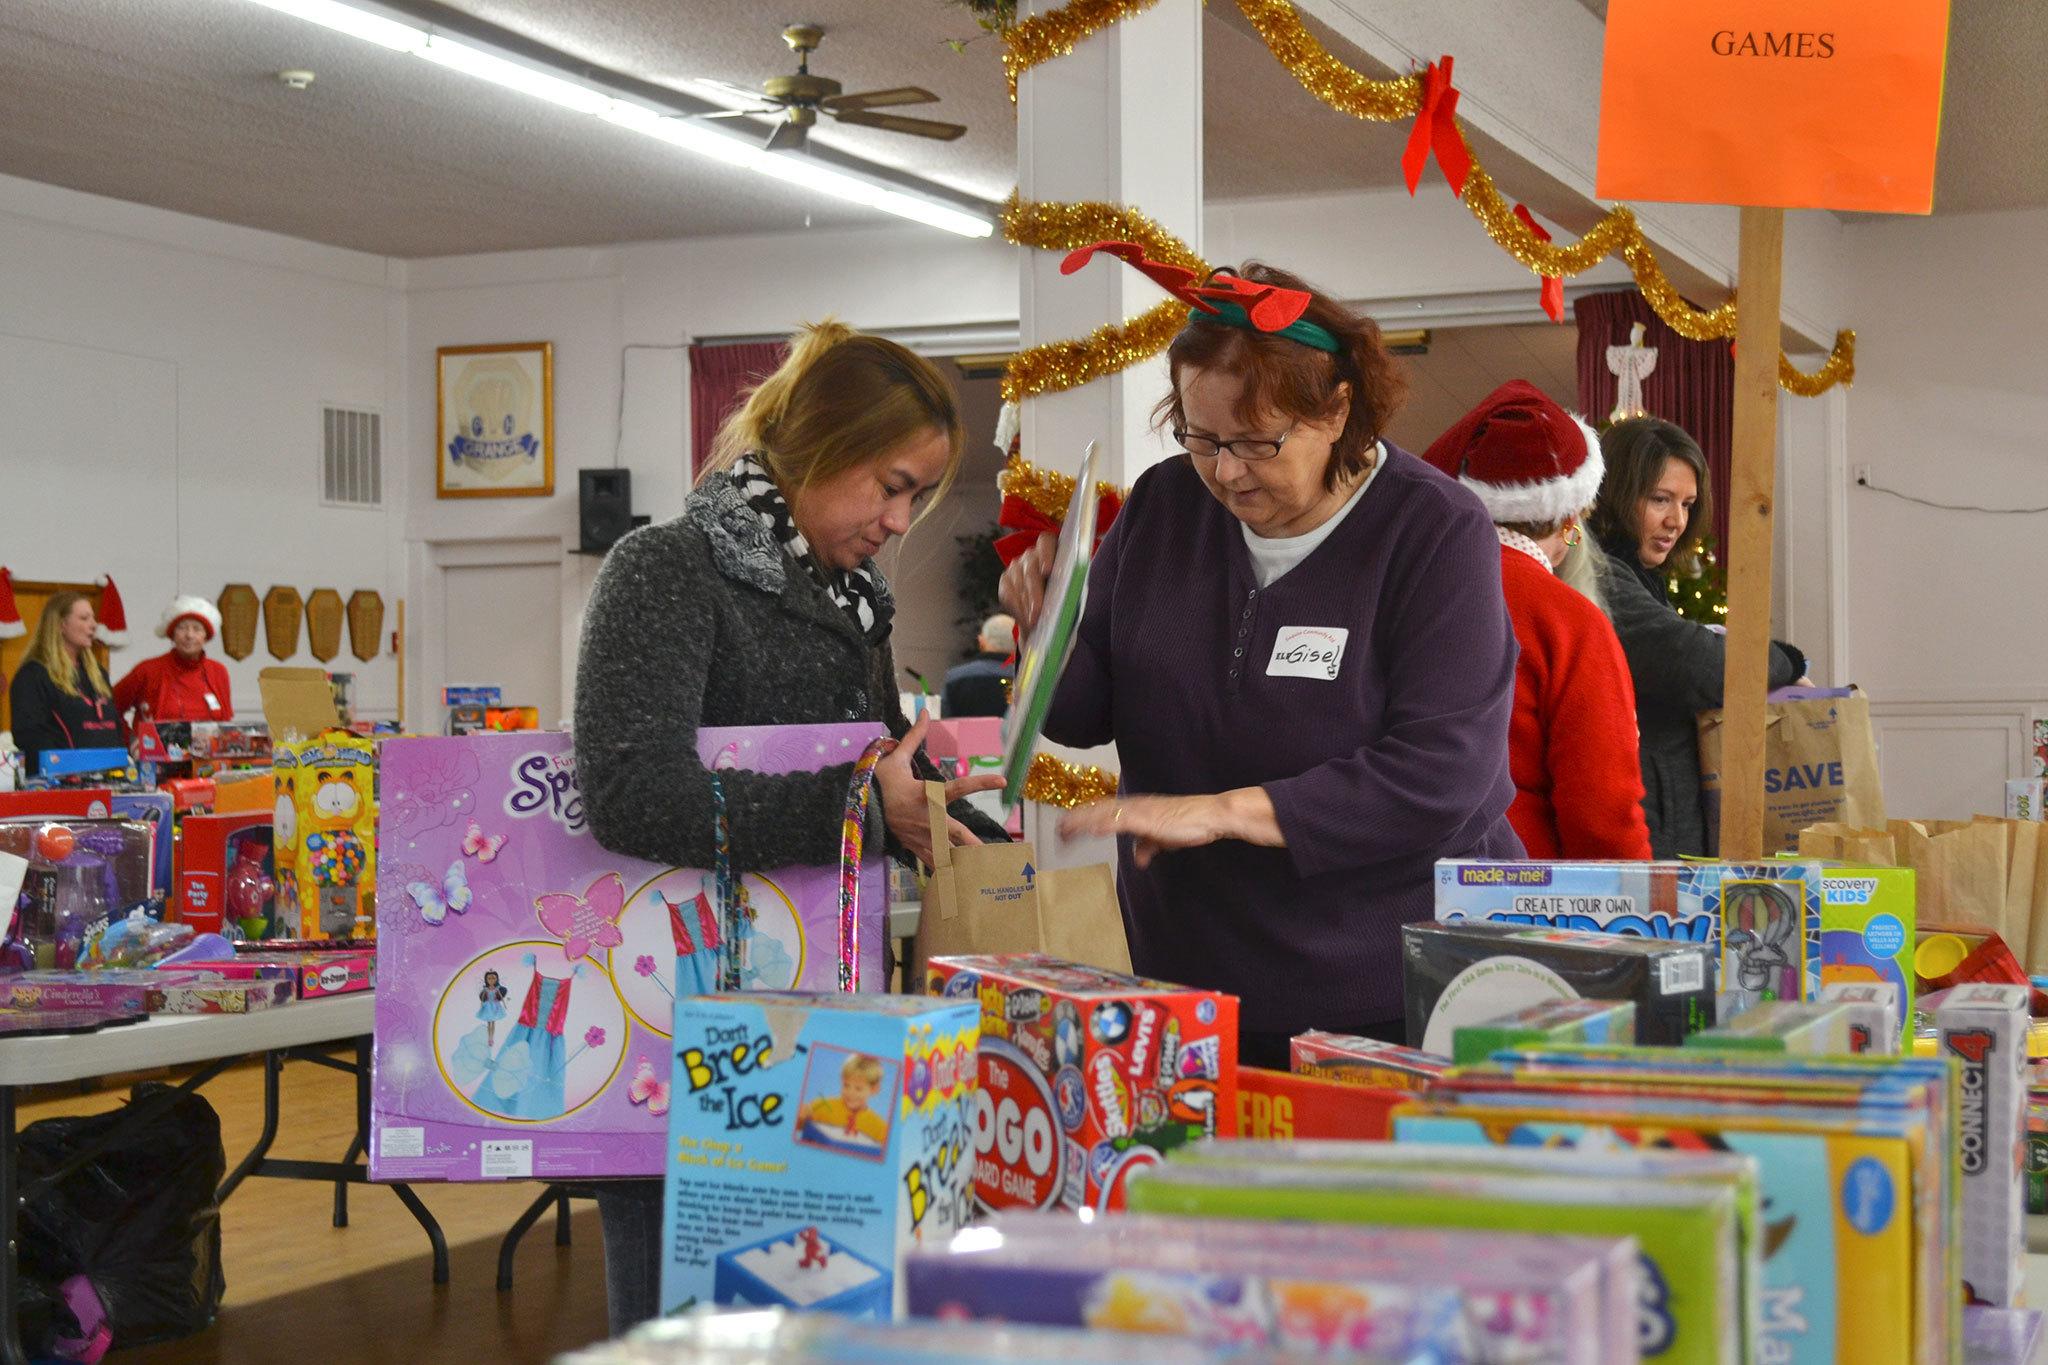 Farah Durham of Sequim looks for toys for her 4-year-old daughter with help from volunteer Gisele Gala at Toys for Sequim Kids on Dec. 14 in the Sequim Prairie Grange. “It’s a blessing to help others because God has blessed us so abundantly,” Gala said. Sequim Gazette photo by Matthew Nash